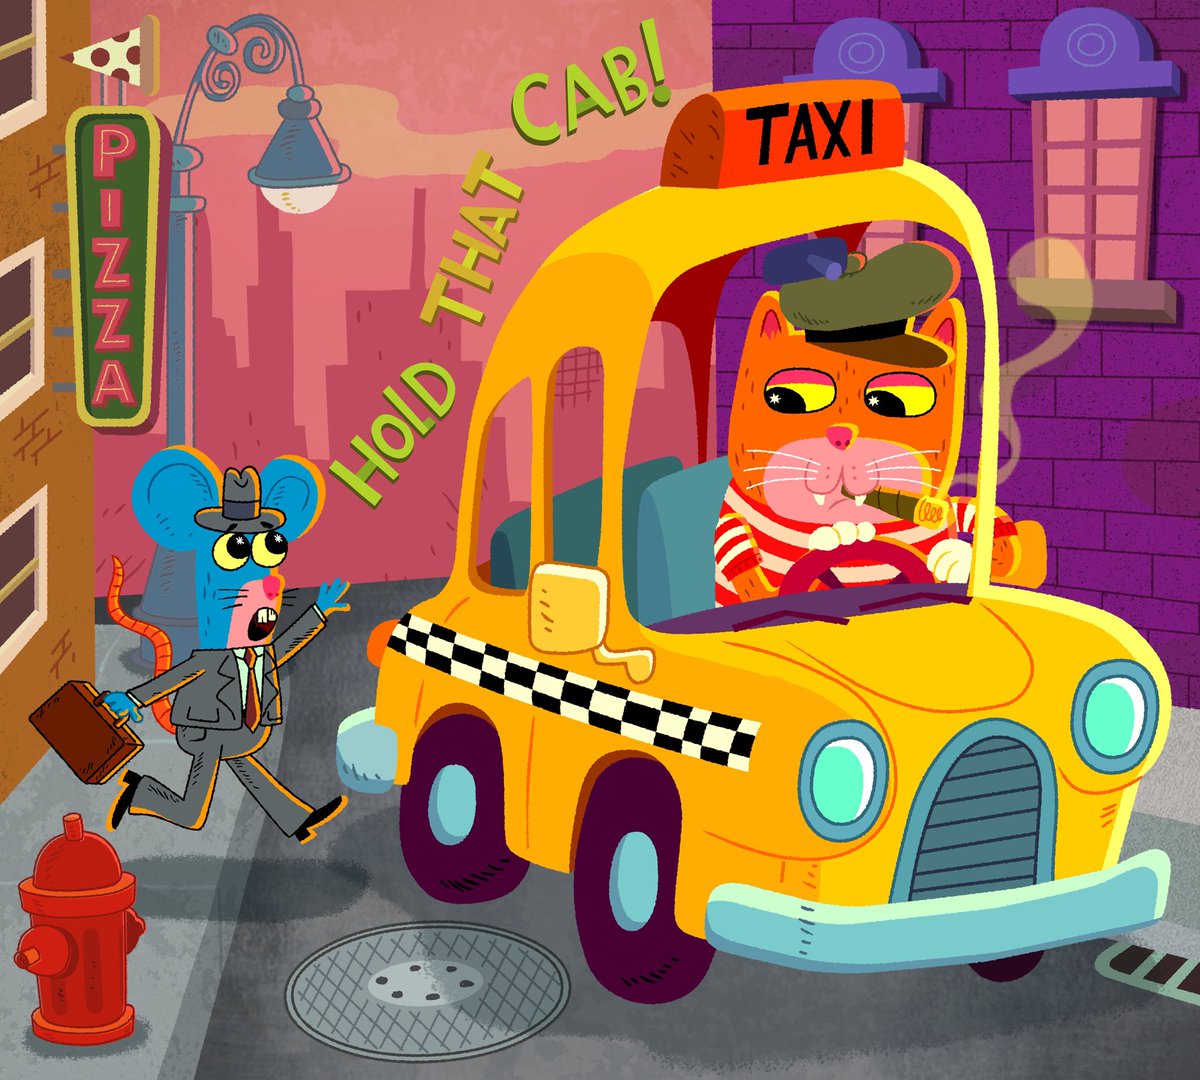 In the days before Uber and Lyft, hailing a cab used to feel like such an accomplishment in the city. #childrenillustration #childrensbooks #kidlitart #illustration #taxi #childrenspublishing #kidlit